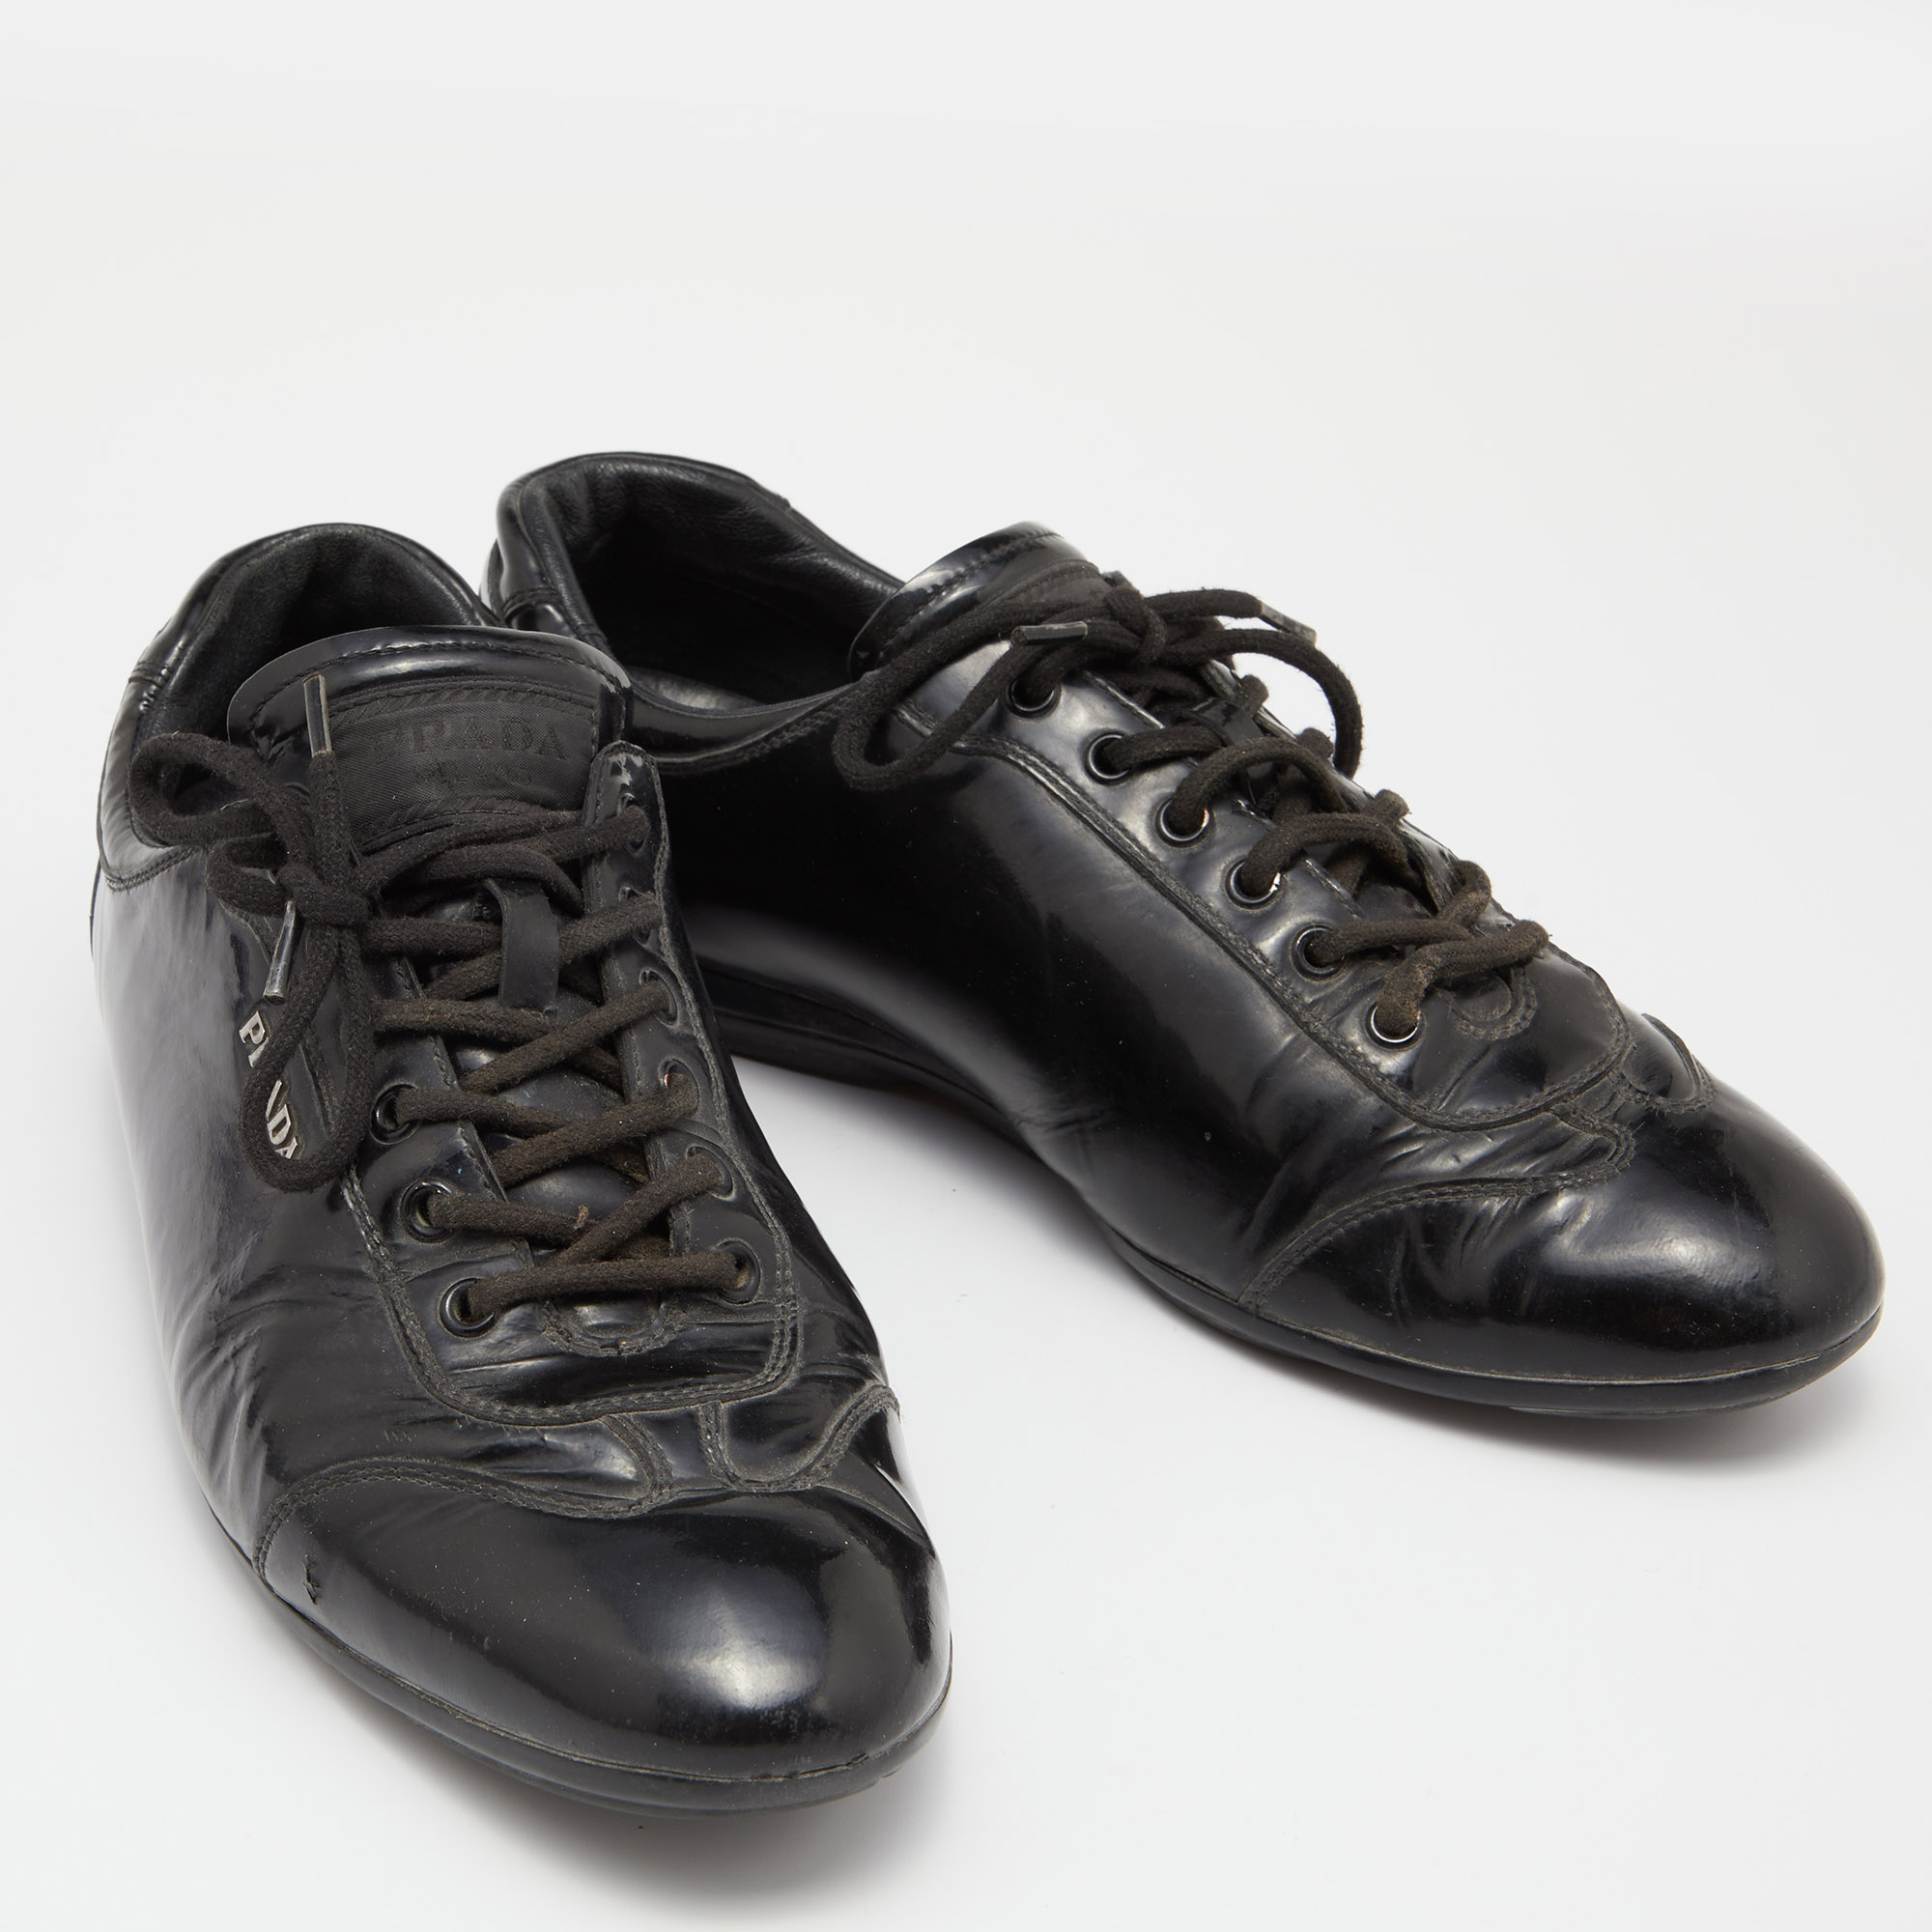 Prada Sports Black Patent Leather Low Top Sneakers Size 40